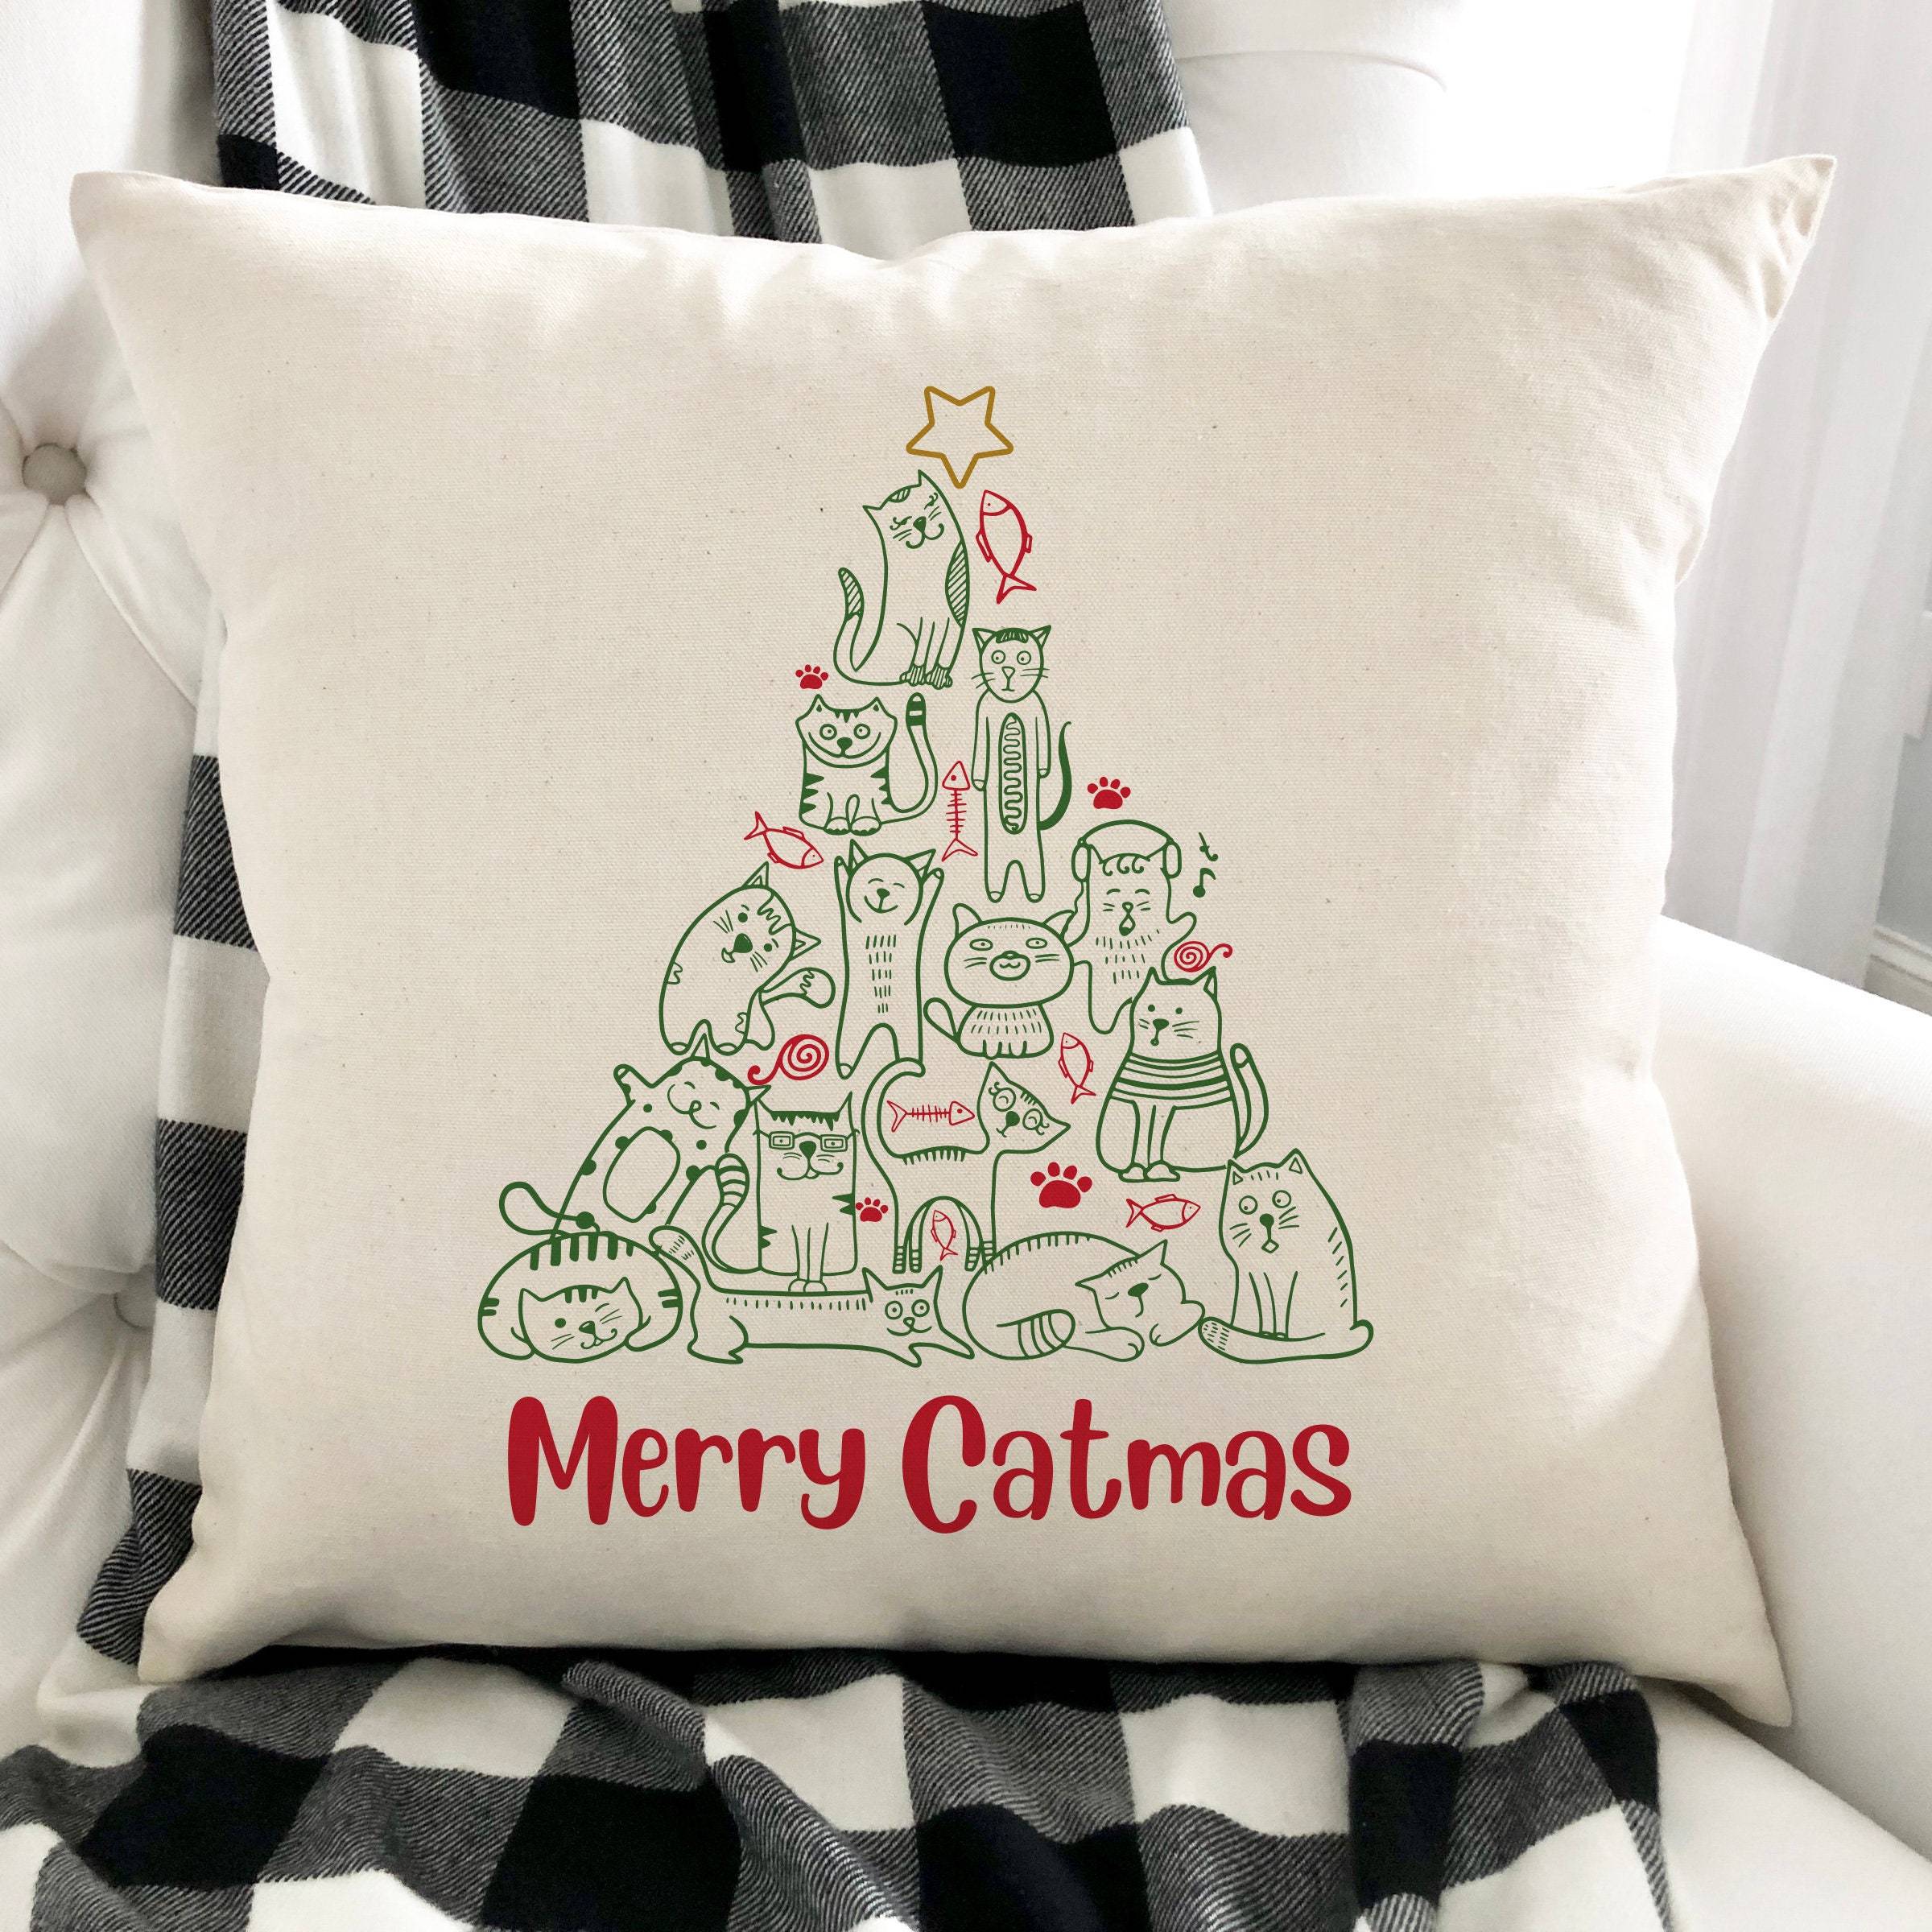 Merry catmas cushion, Cat owner Christmas gift, Catlover Xmas present